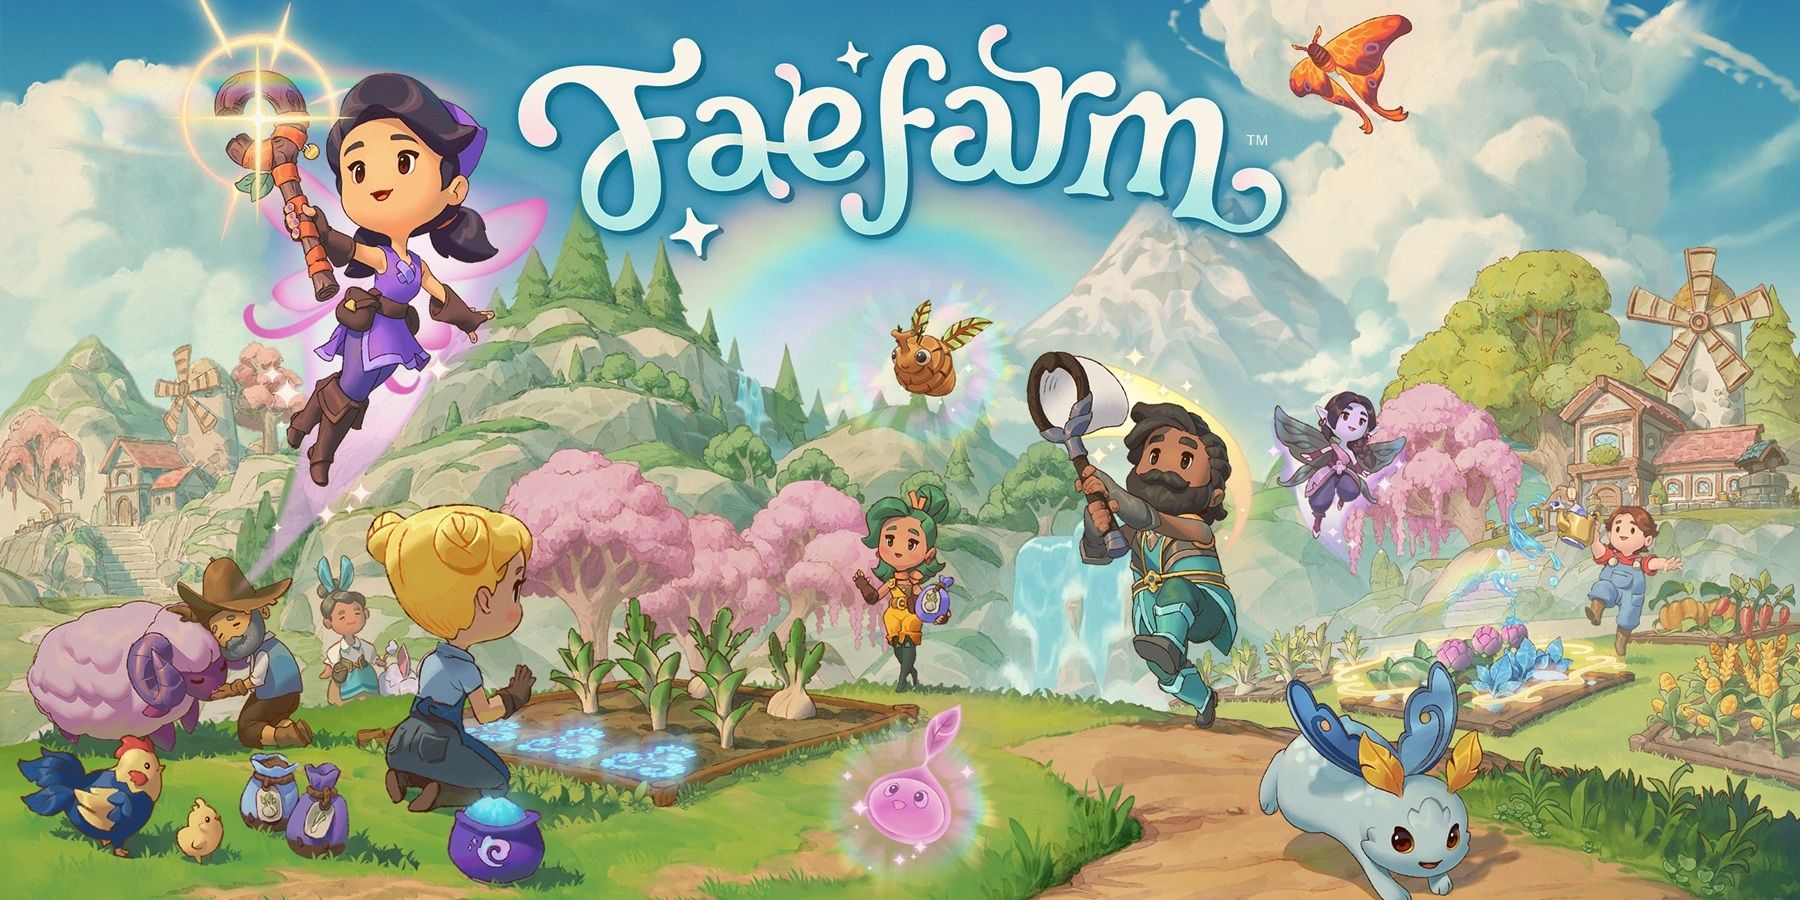 fae-farm-fans-should-be-excited-for-december-14